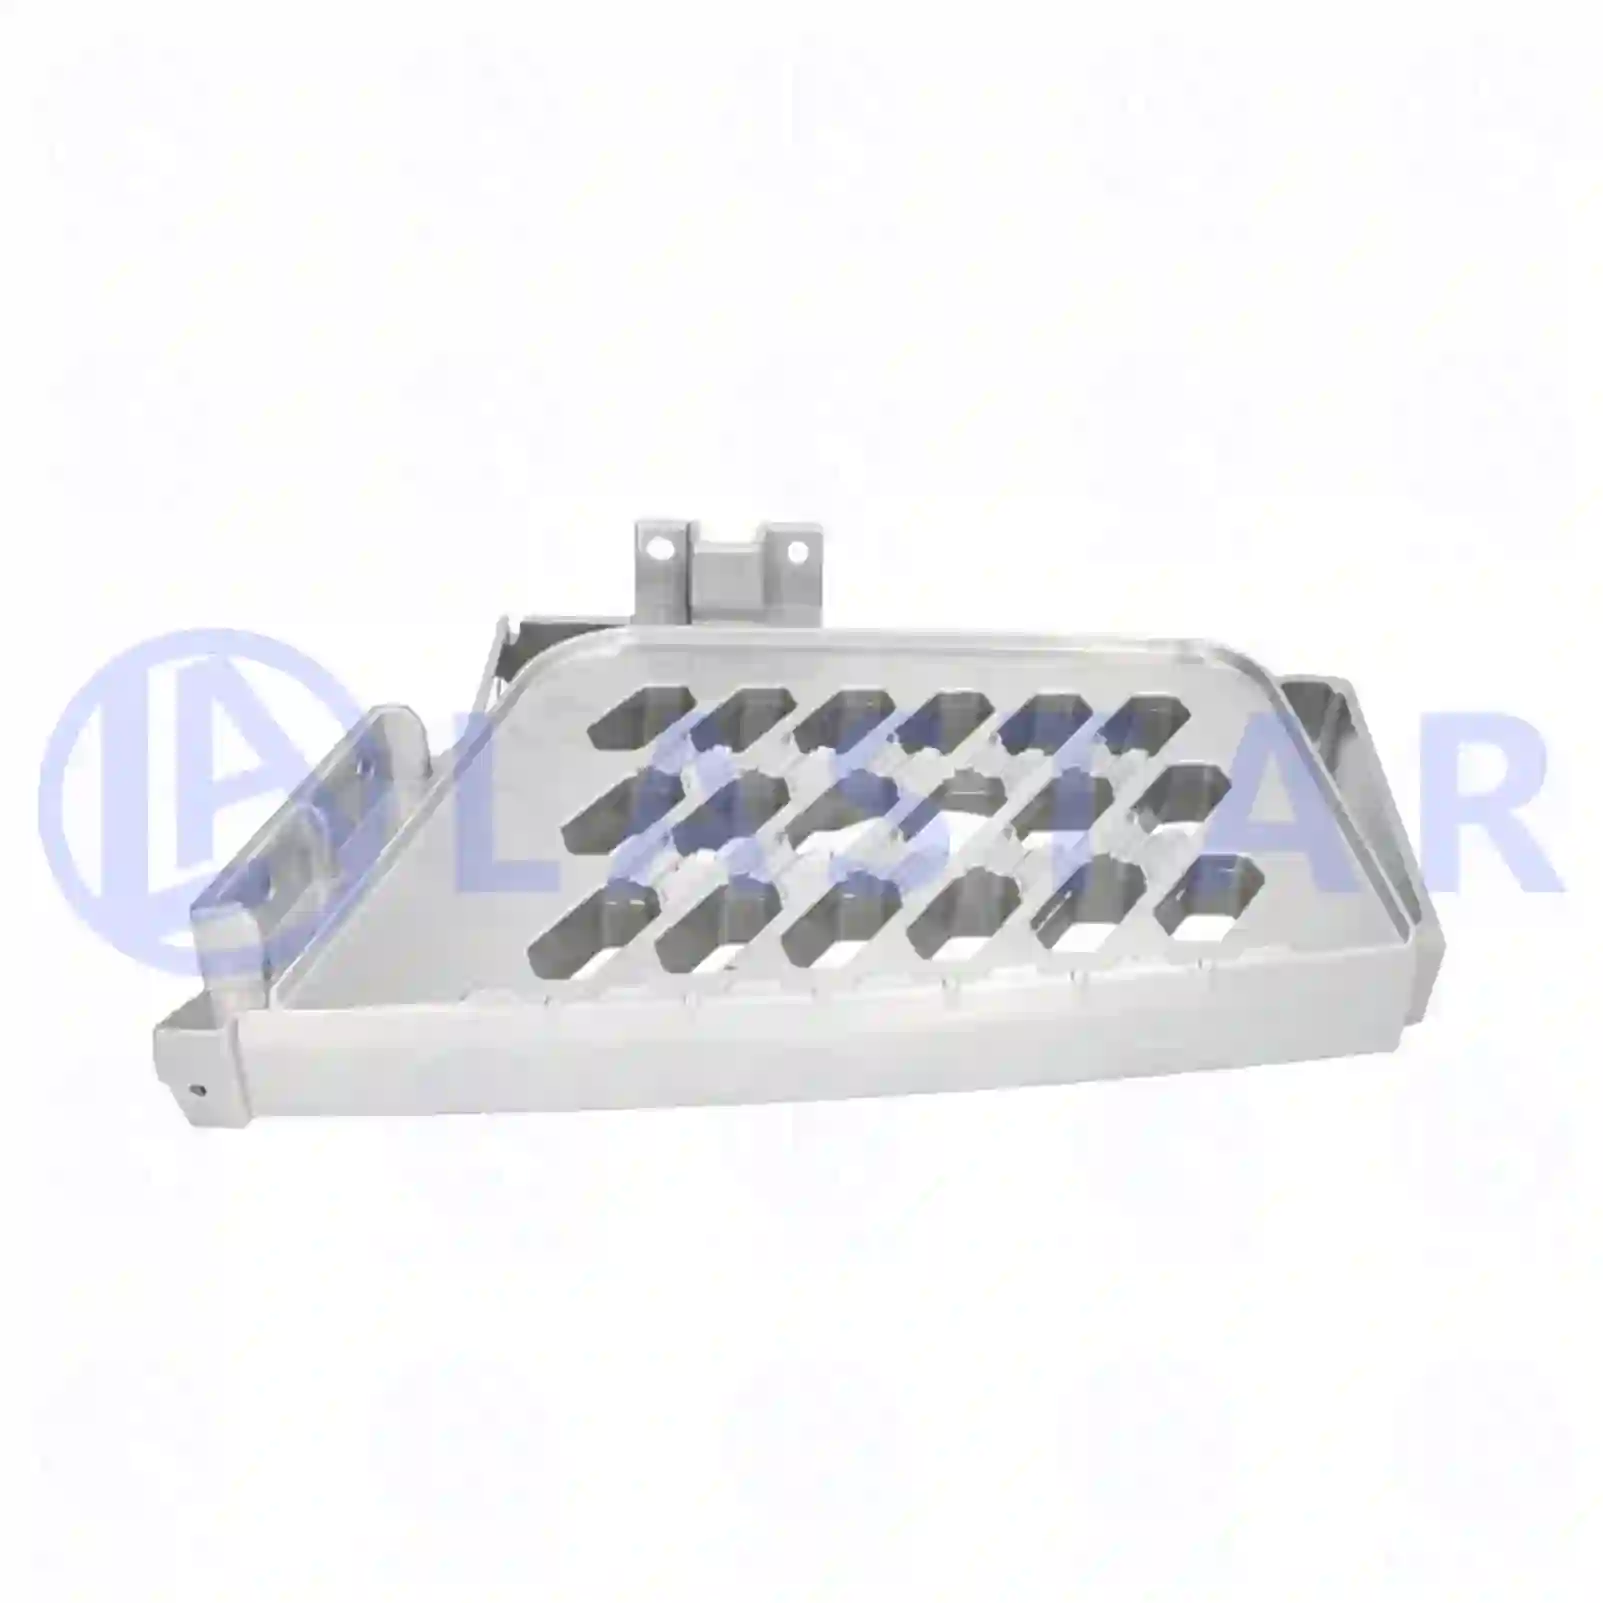 Step plate, right, 77721152, 82151656 ||  77721152 Lastar Spare Part | Truck Spare Parts, Auotomotive Spare Parts Step plate, right, 77721152, 82151656 ||  77721152 Lastar Spare Part | Truck Spare Parts, Auotomotive Spare Parts